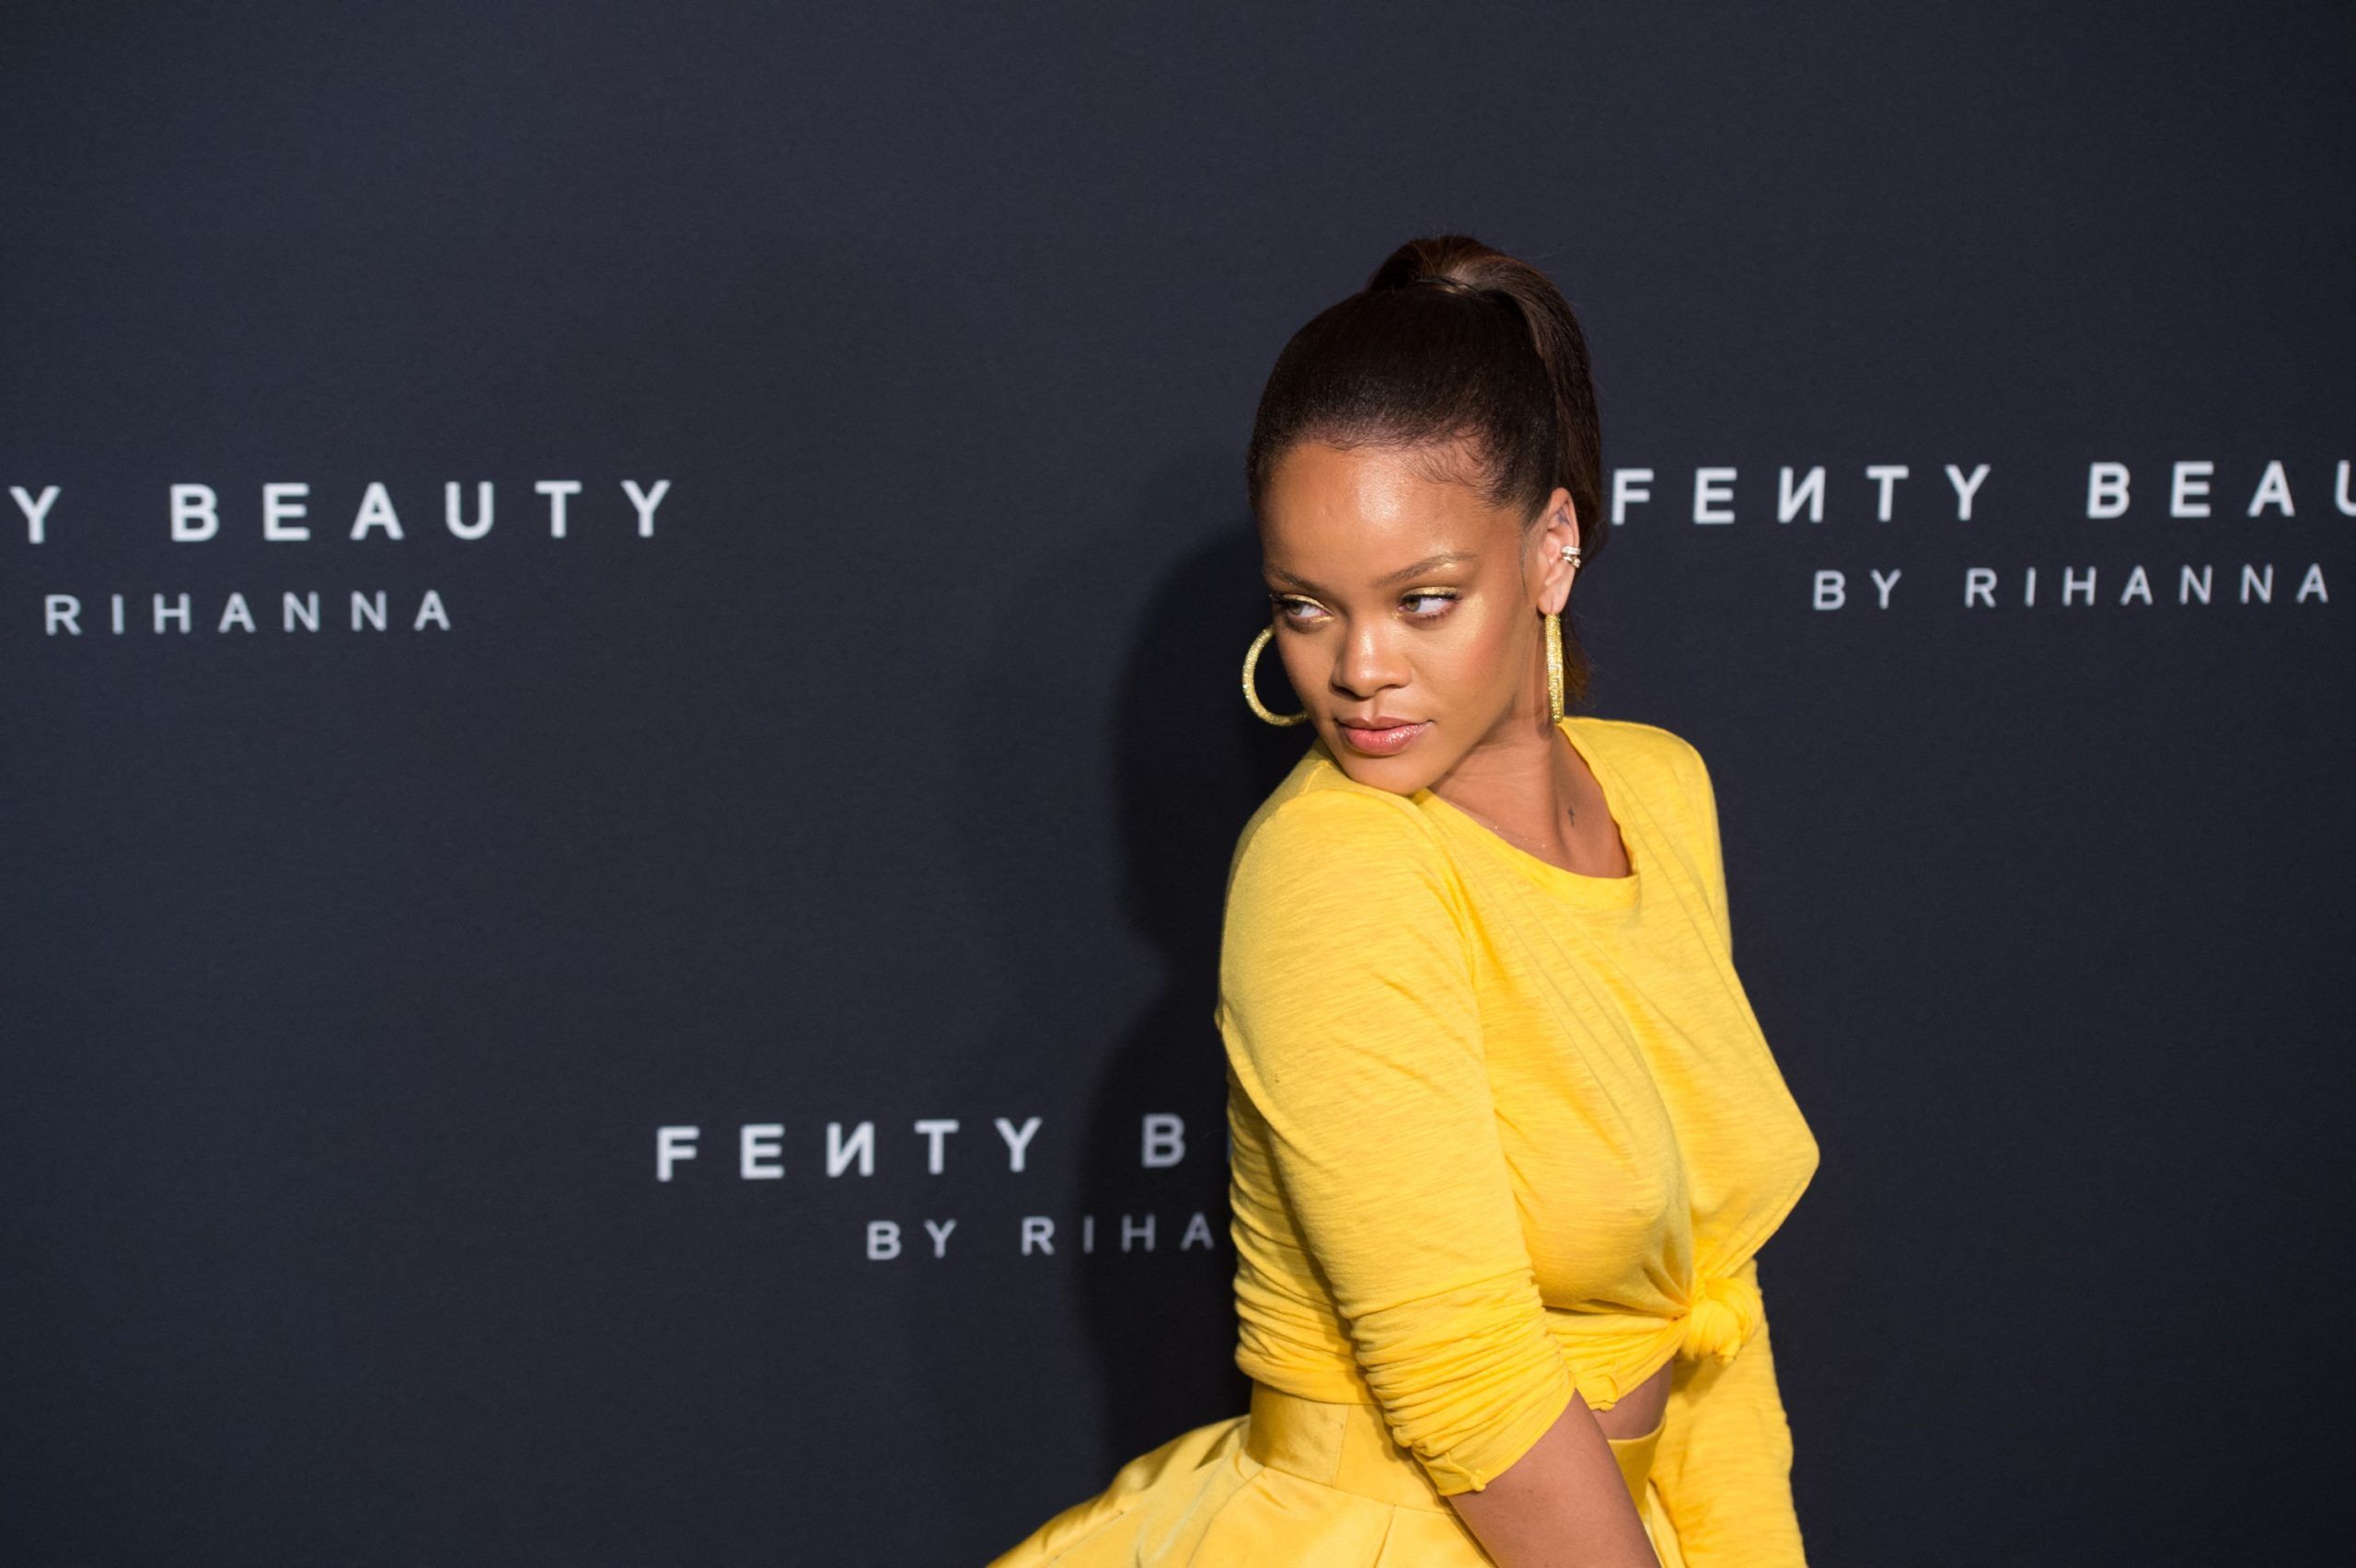 Rihanna and 8 other self-made women billionaires in the world